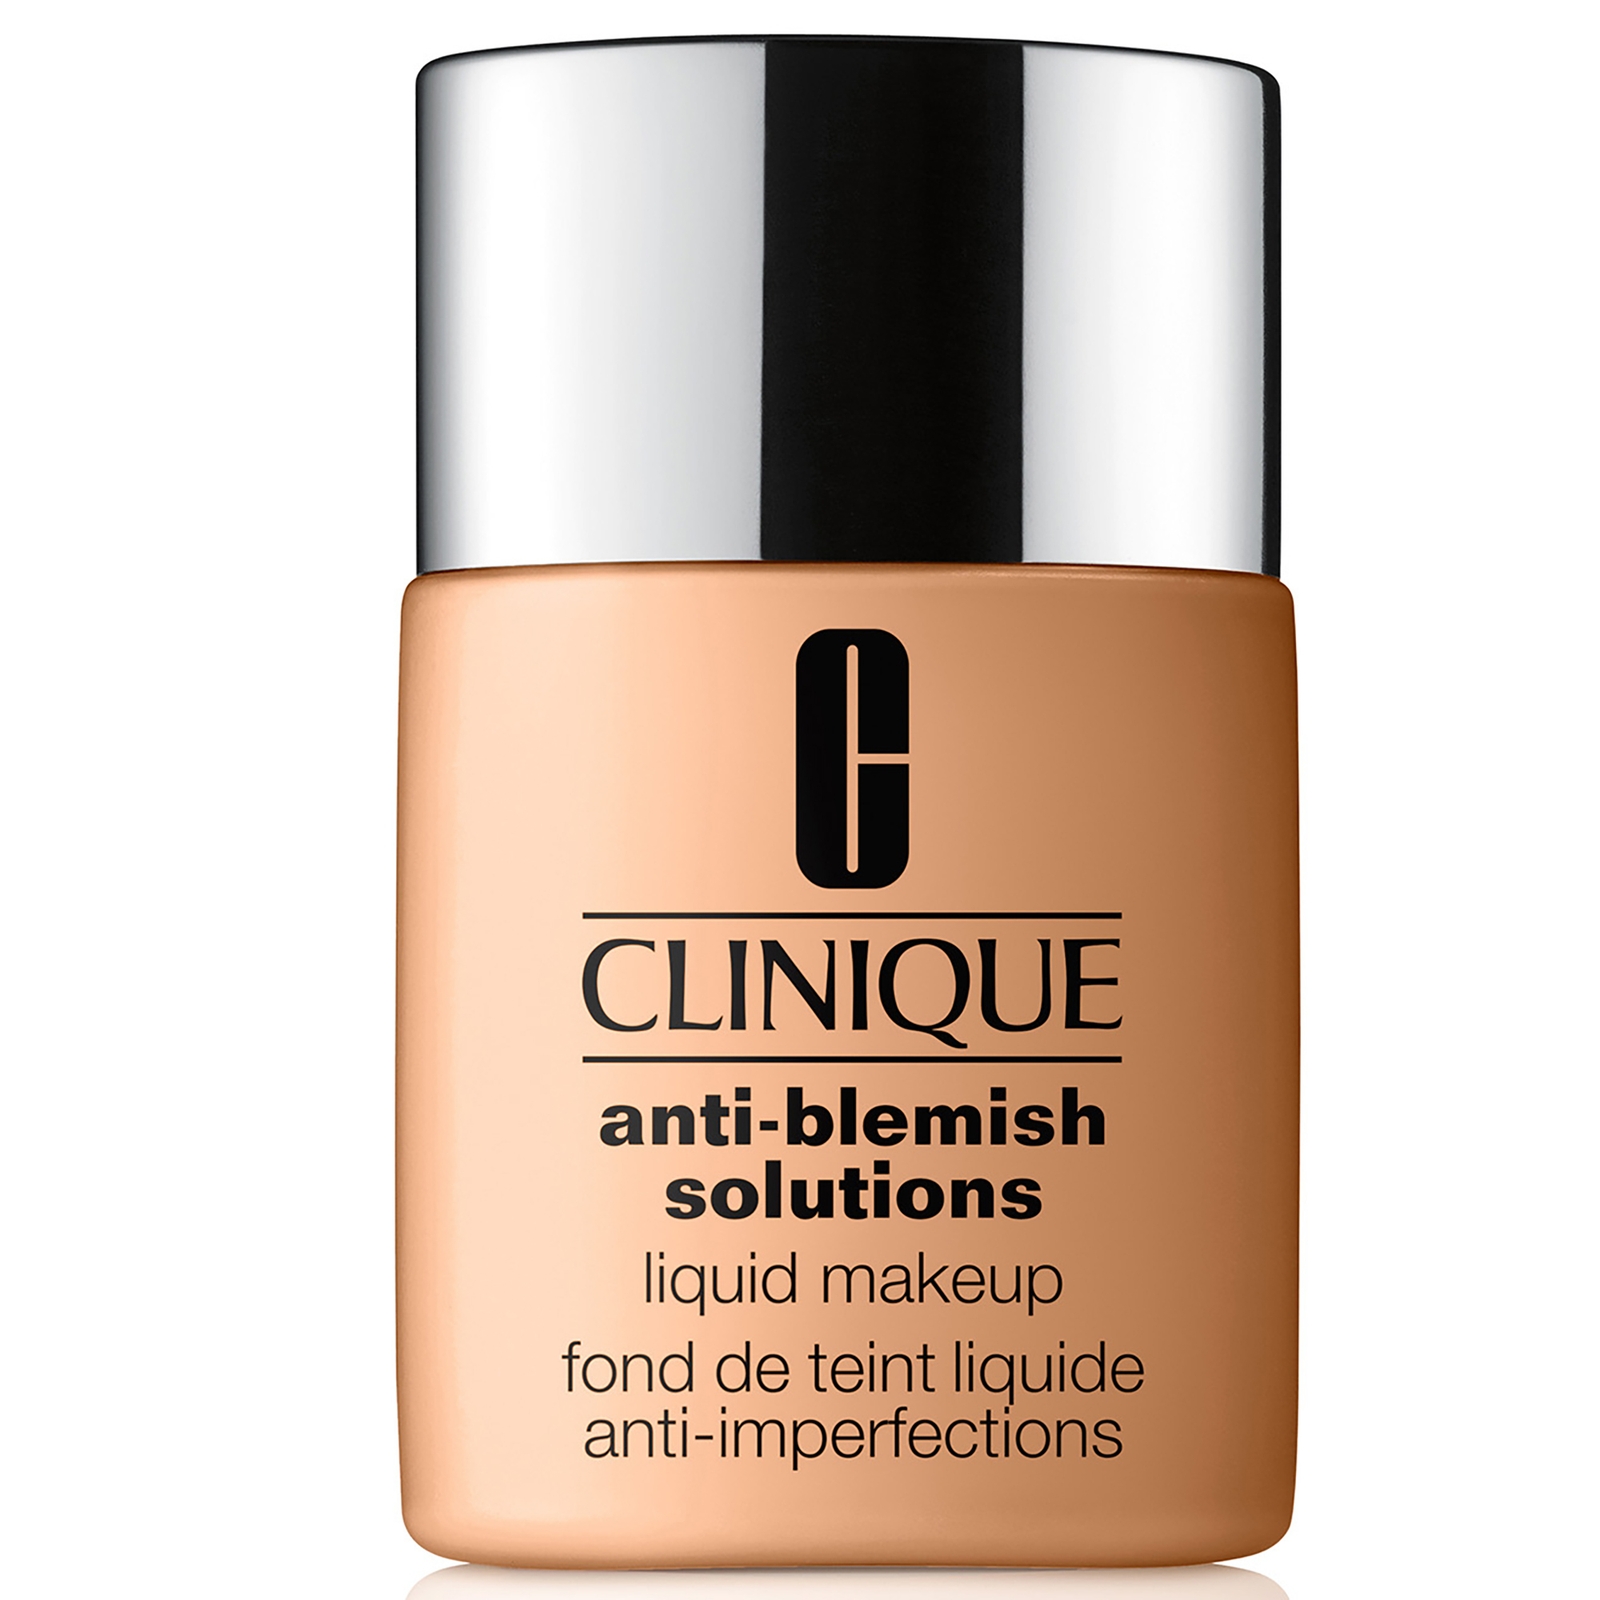 Clinique Anti-Blemish Solutions Liquid Makeup with Salicylic Acid 30ml (Various Shades) - WN 38 Stone